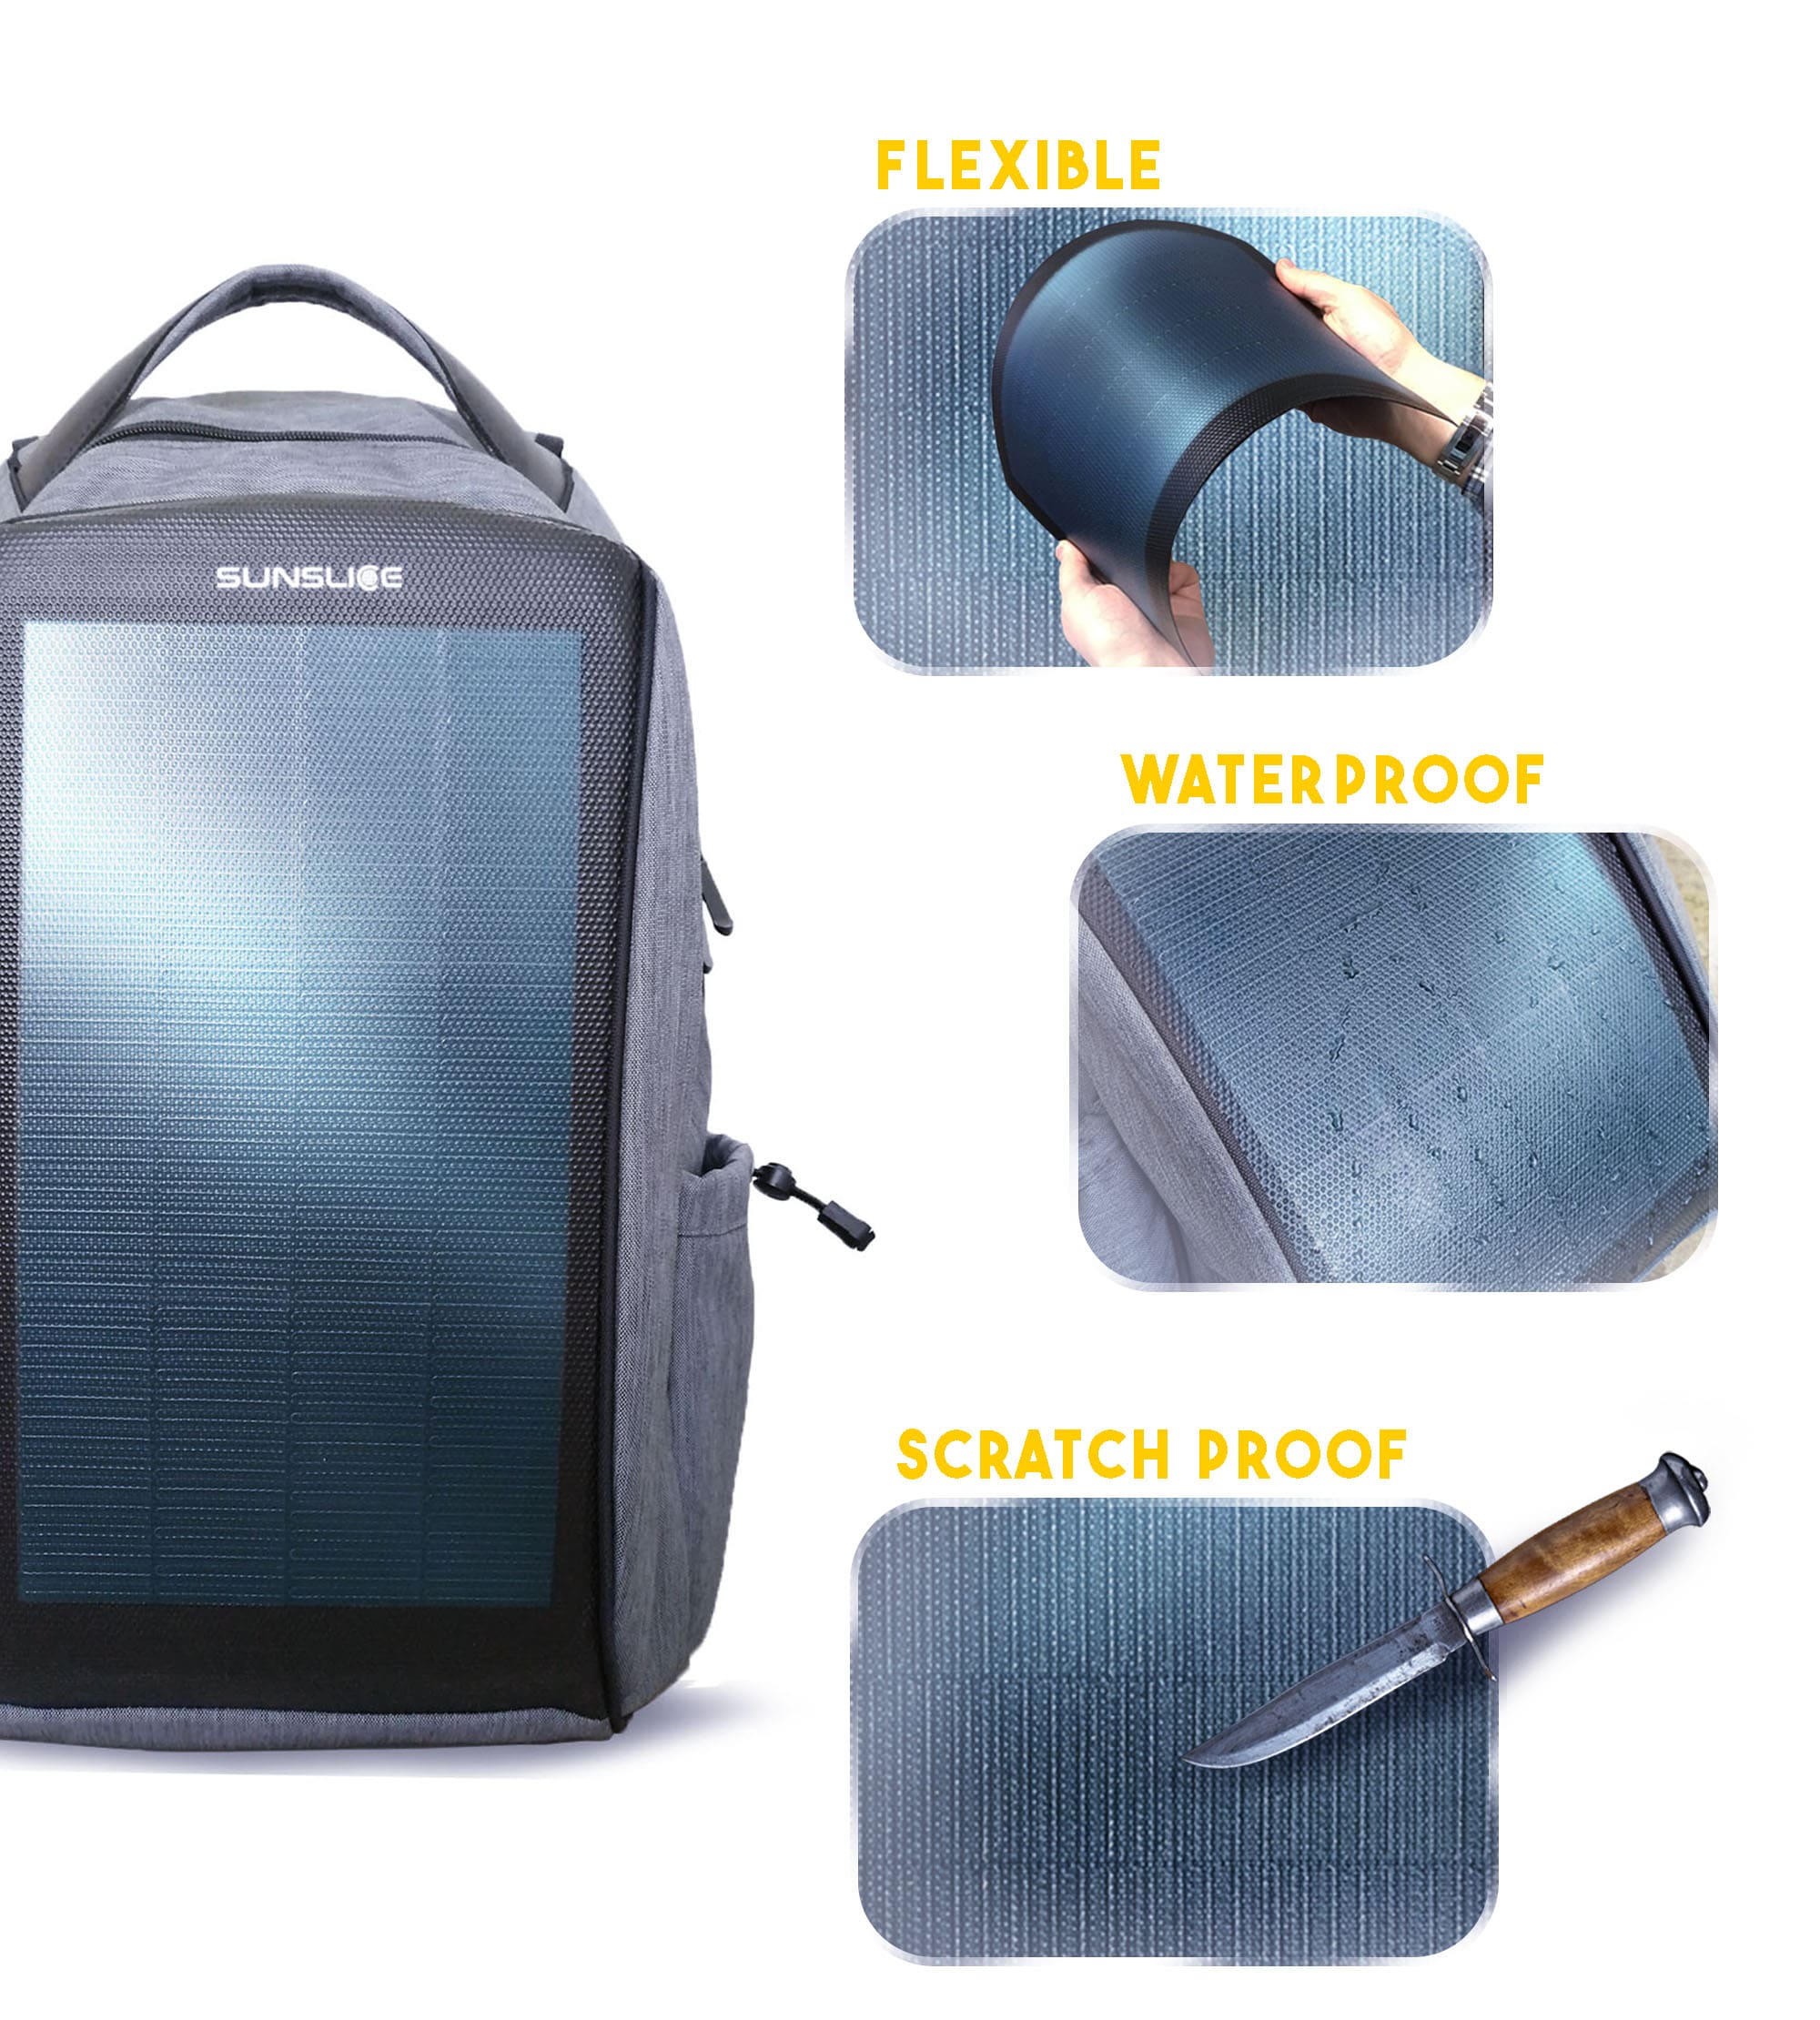 Solar backpack scratch proof, waterproof and flexible 